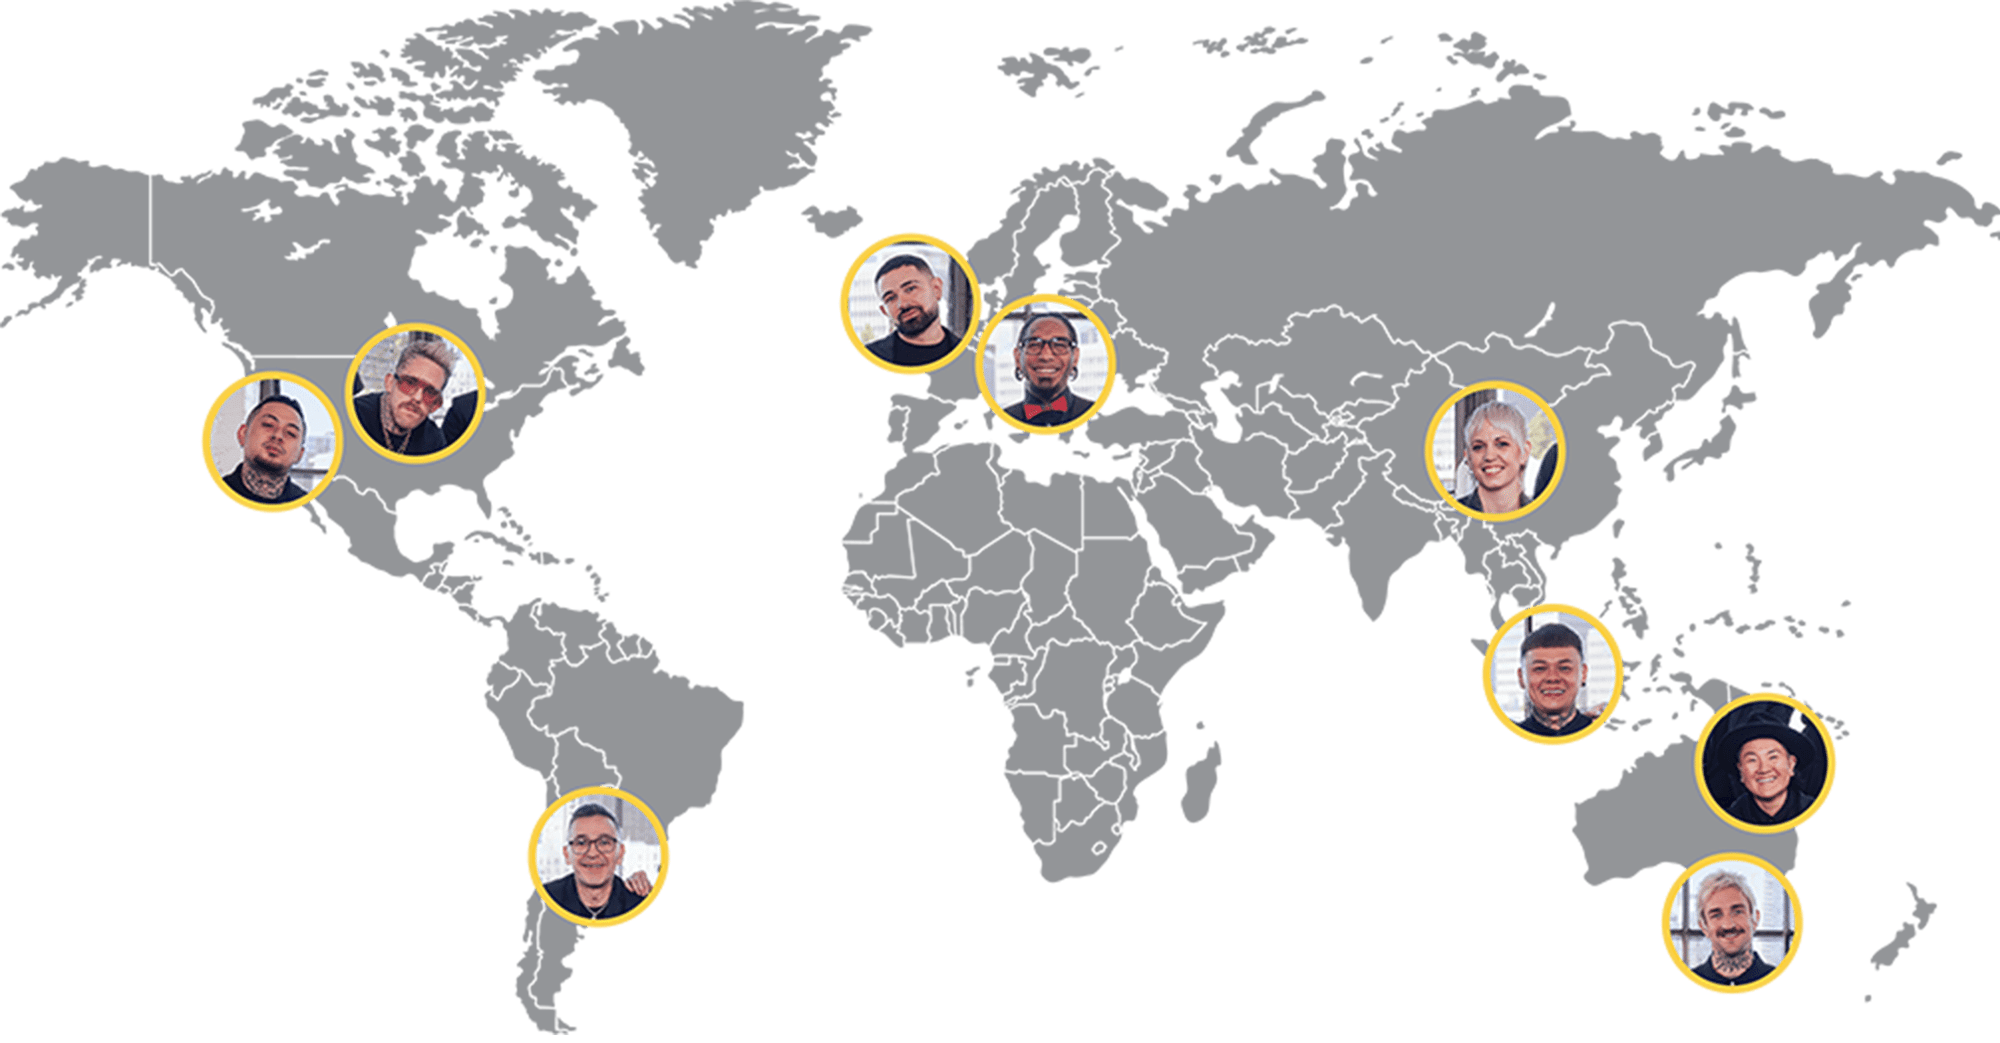 Wahl Global Education is led by educators around the globe